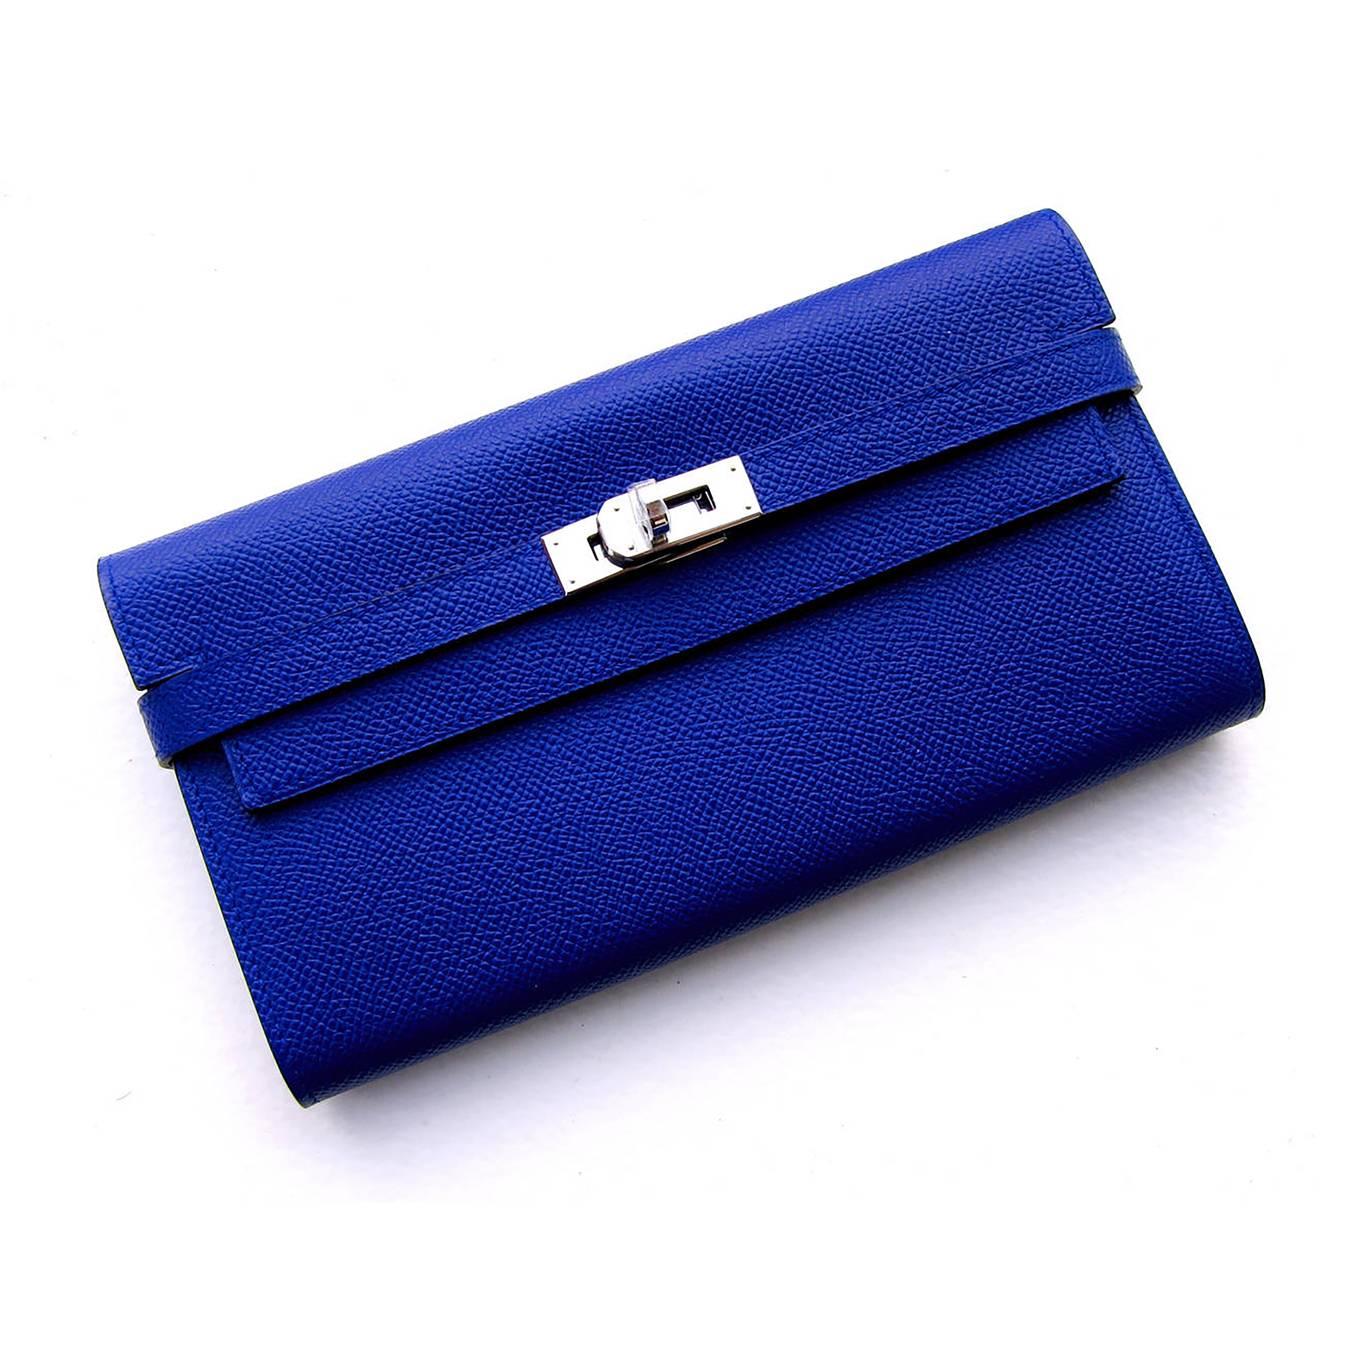 Hermes Blue Electric Epsom Kelly Long Wallet PHW Perfect Gift
Store fresh.  Pristine Condition.
Coming full set with Hermes box and ribbon.  Gift bag available upon request!
Blue Electric in Epsom is just an amazing, jaw-dropping color!
So